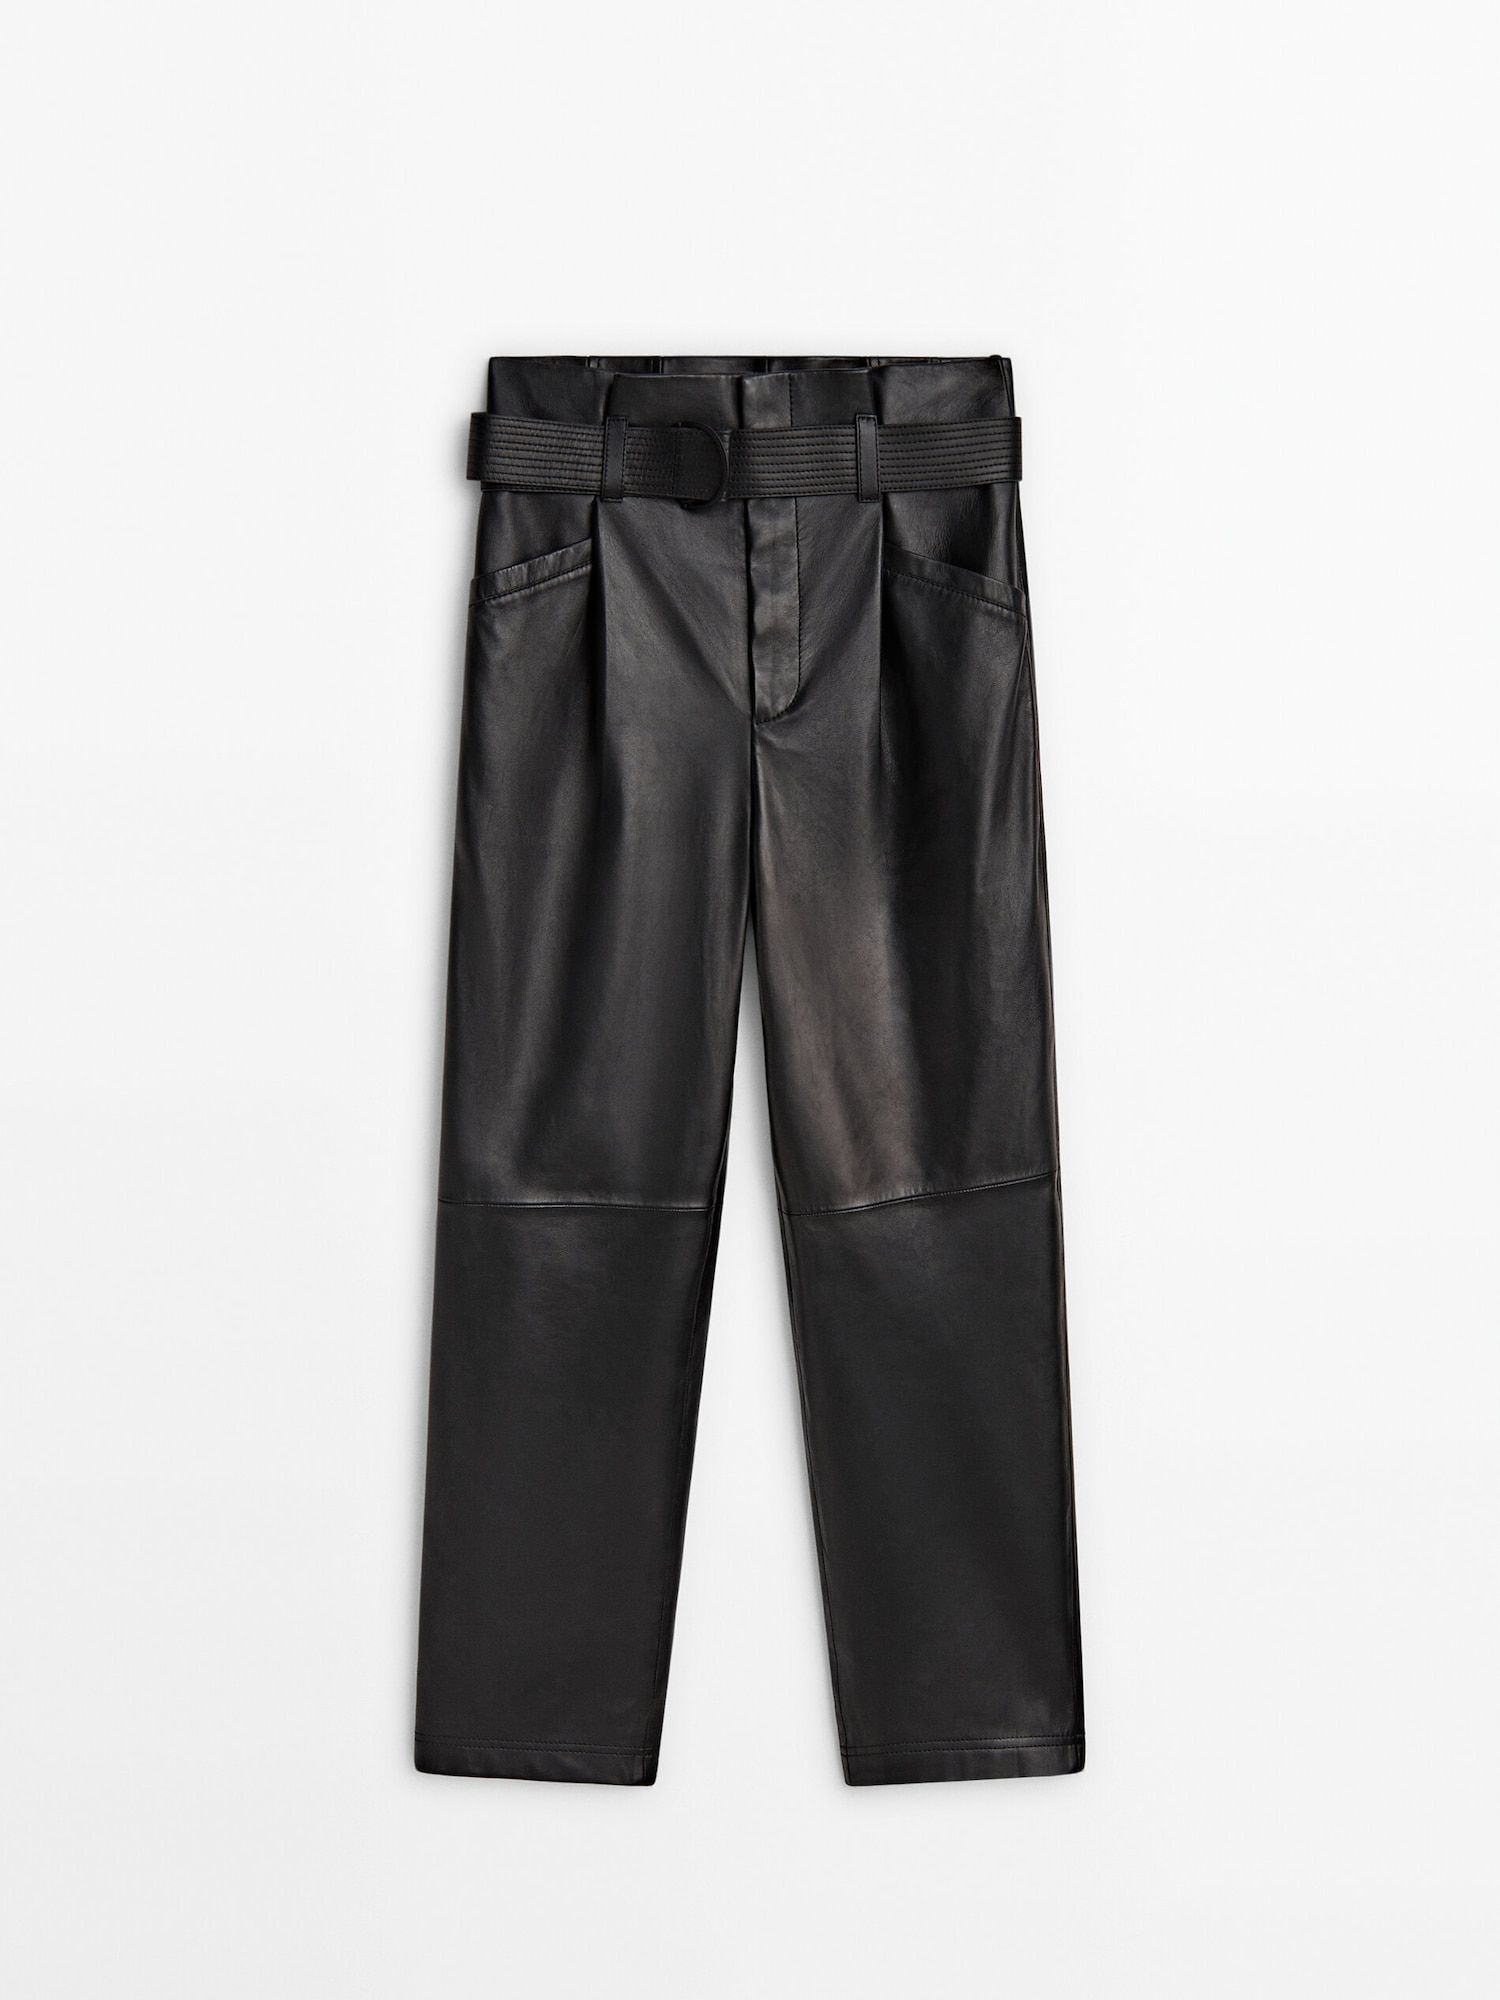 Black nappa leather paperbag trousers | Massimo Dutti (US)